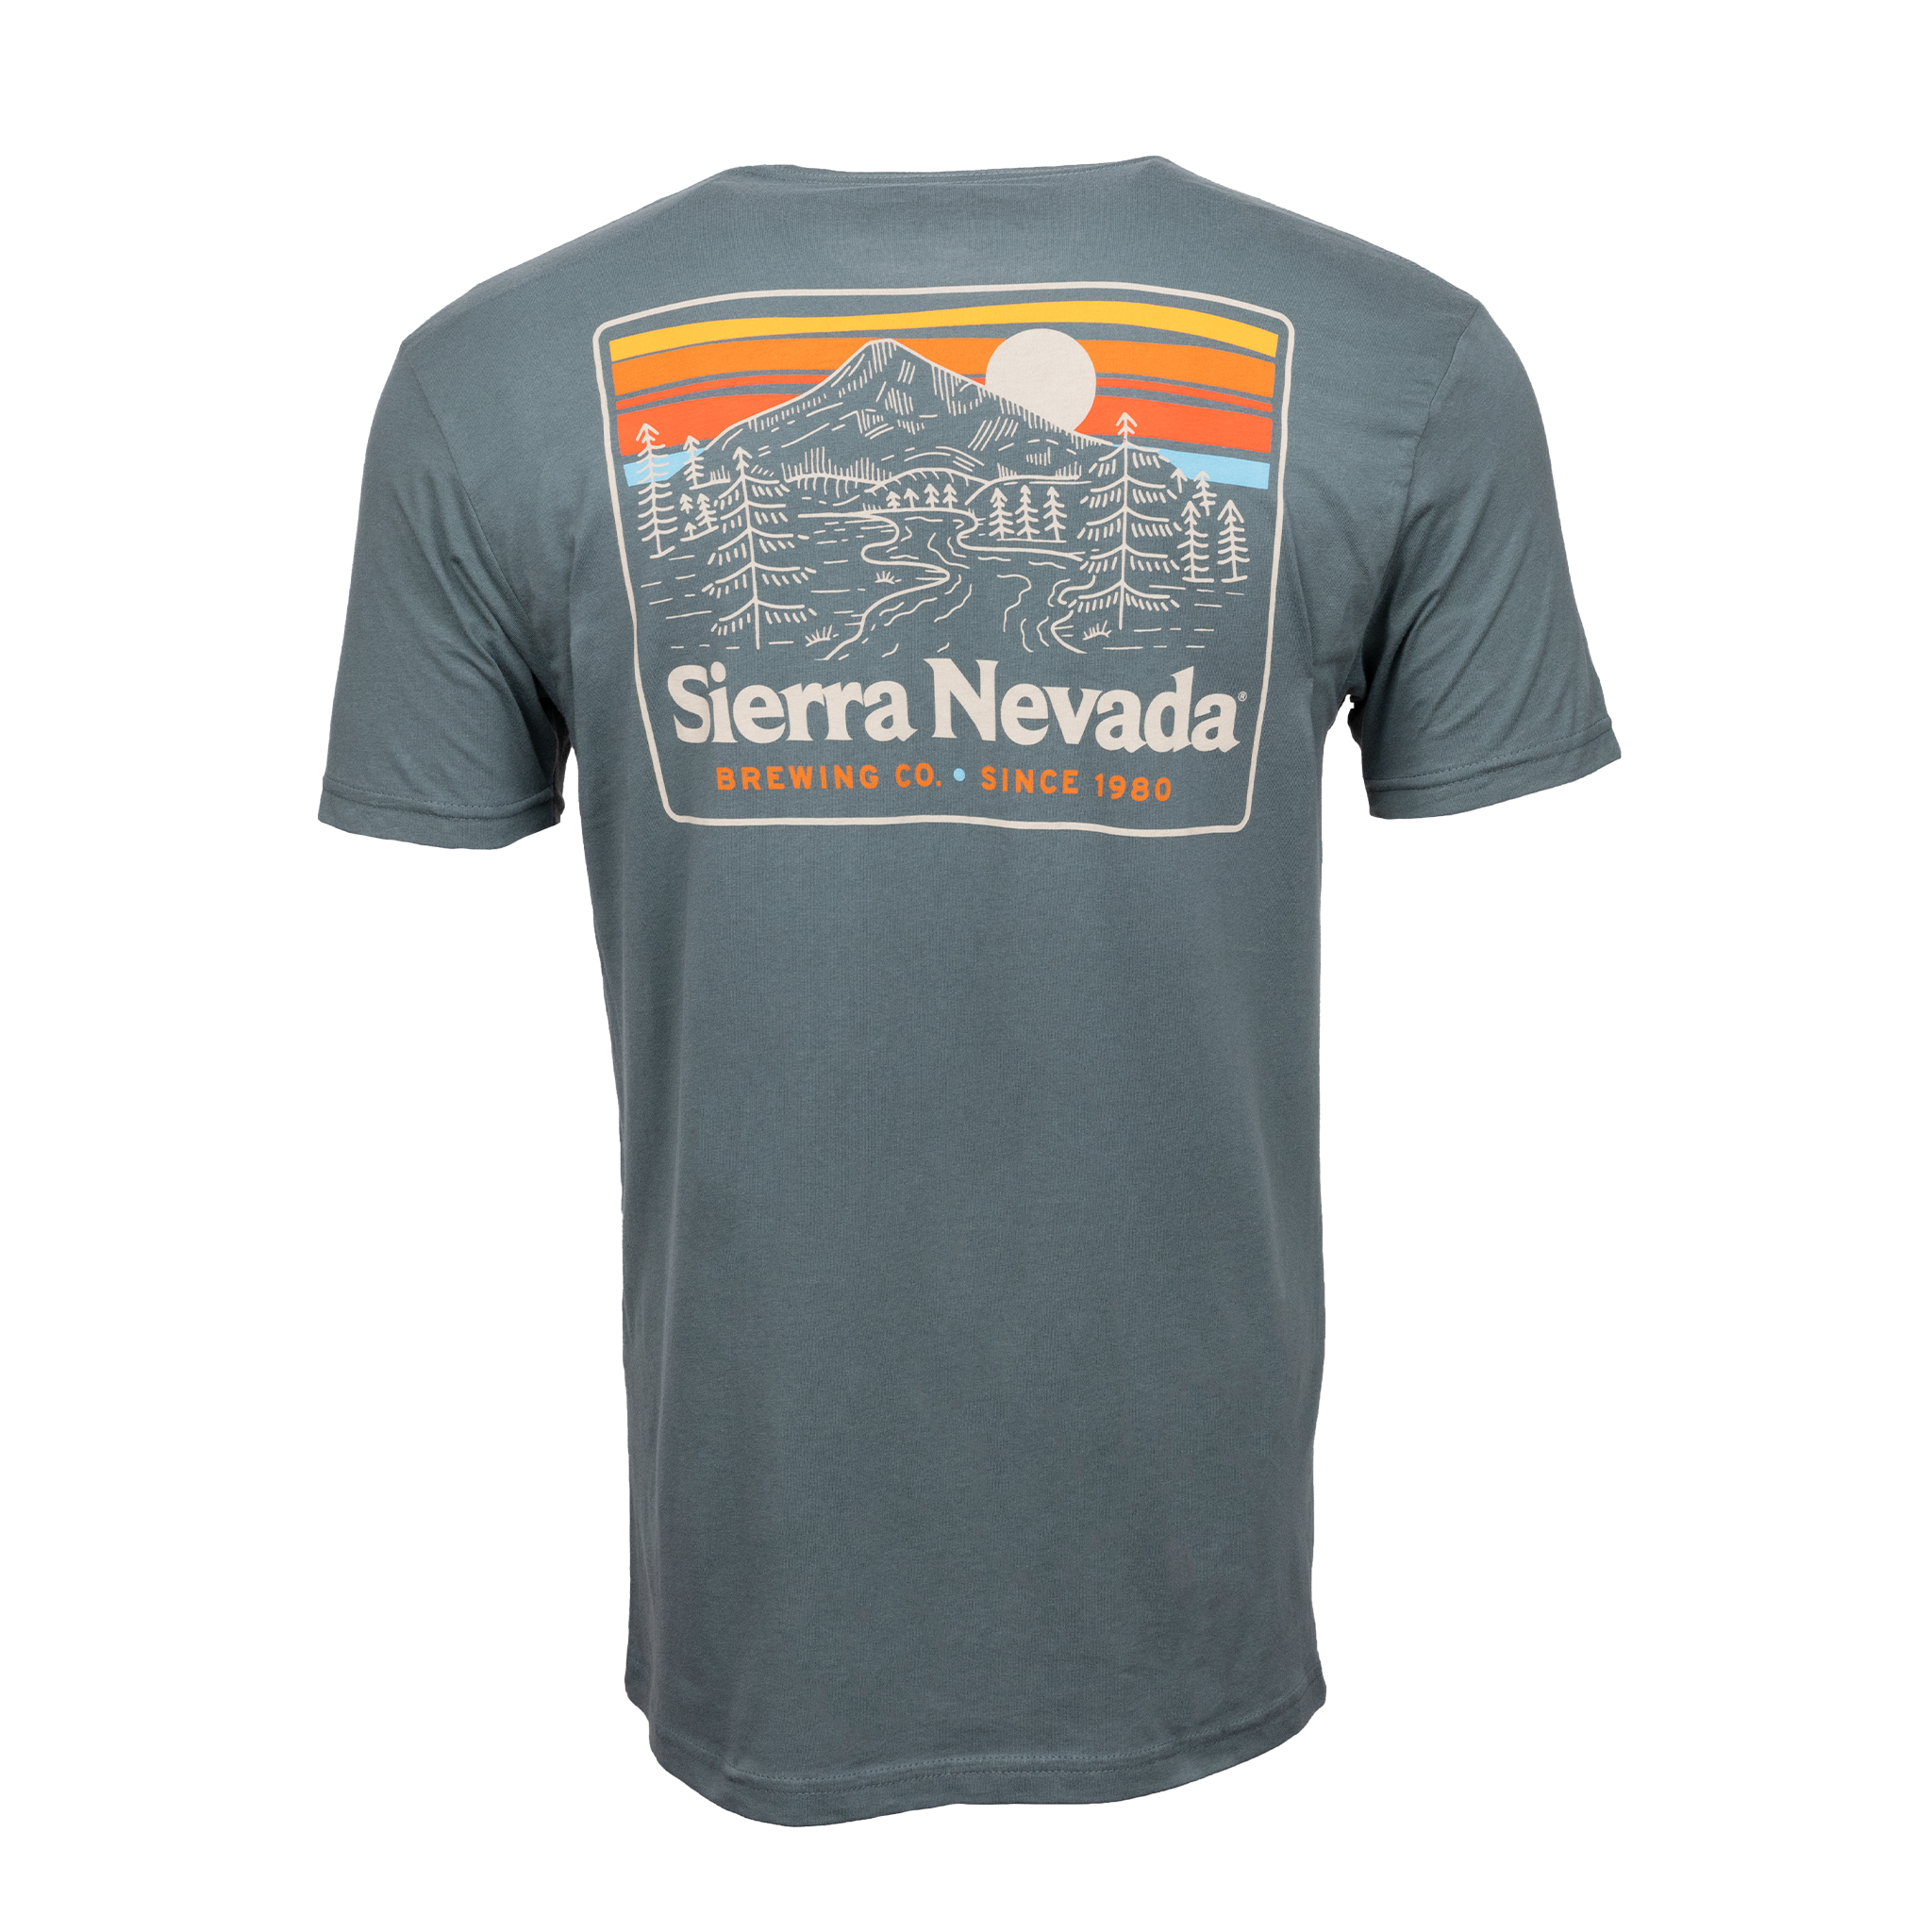 Sierra Nevada Brewing Co. Trail Royal Pine T-Shirt - back view of mountain graphic